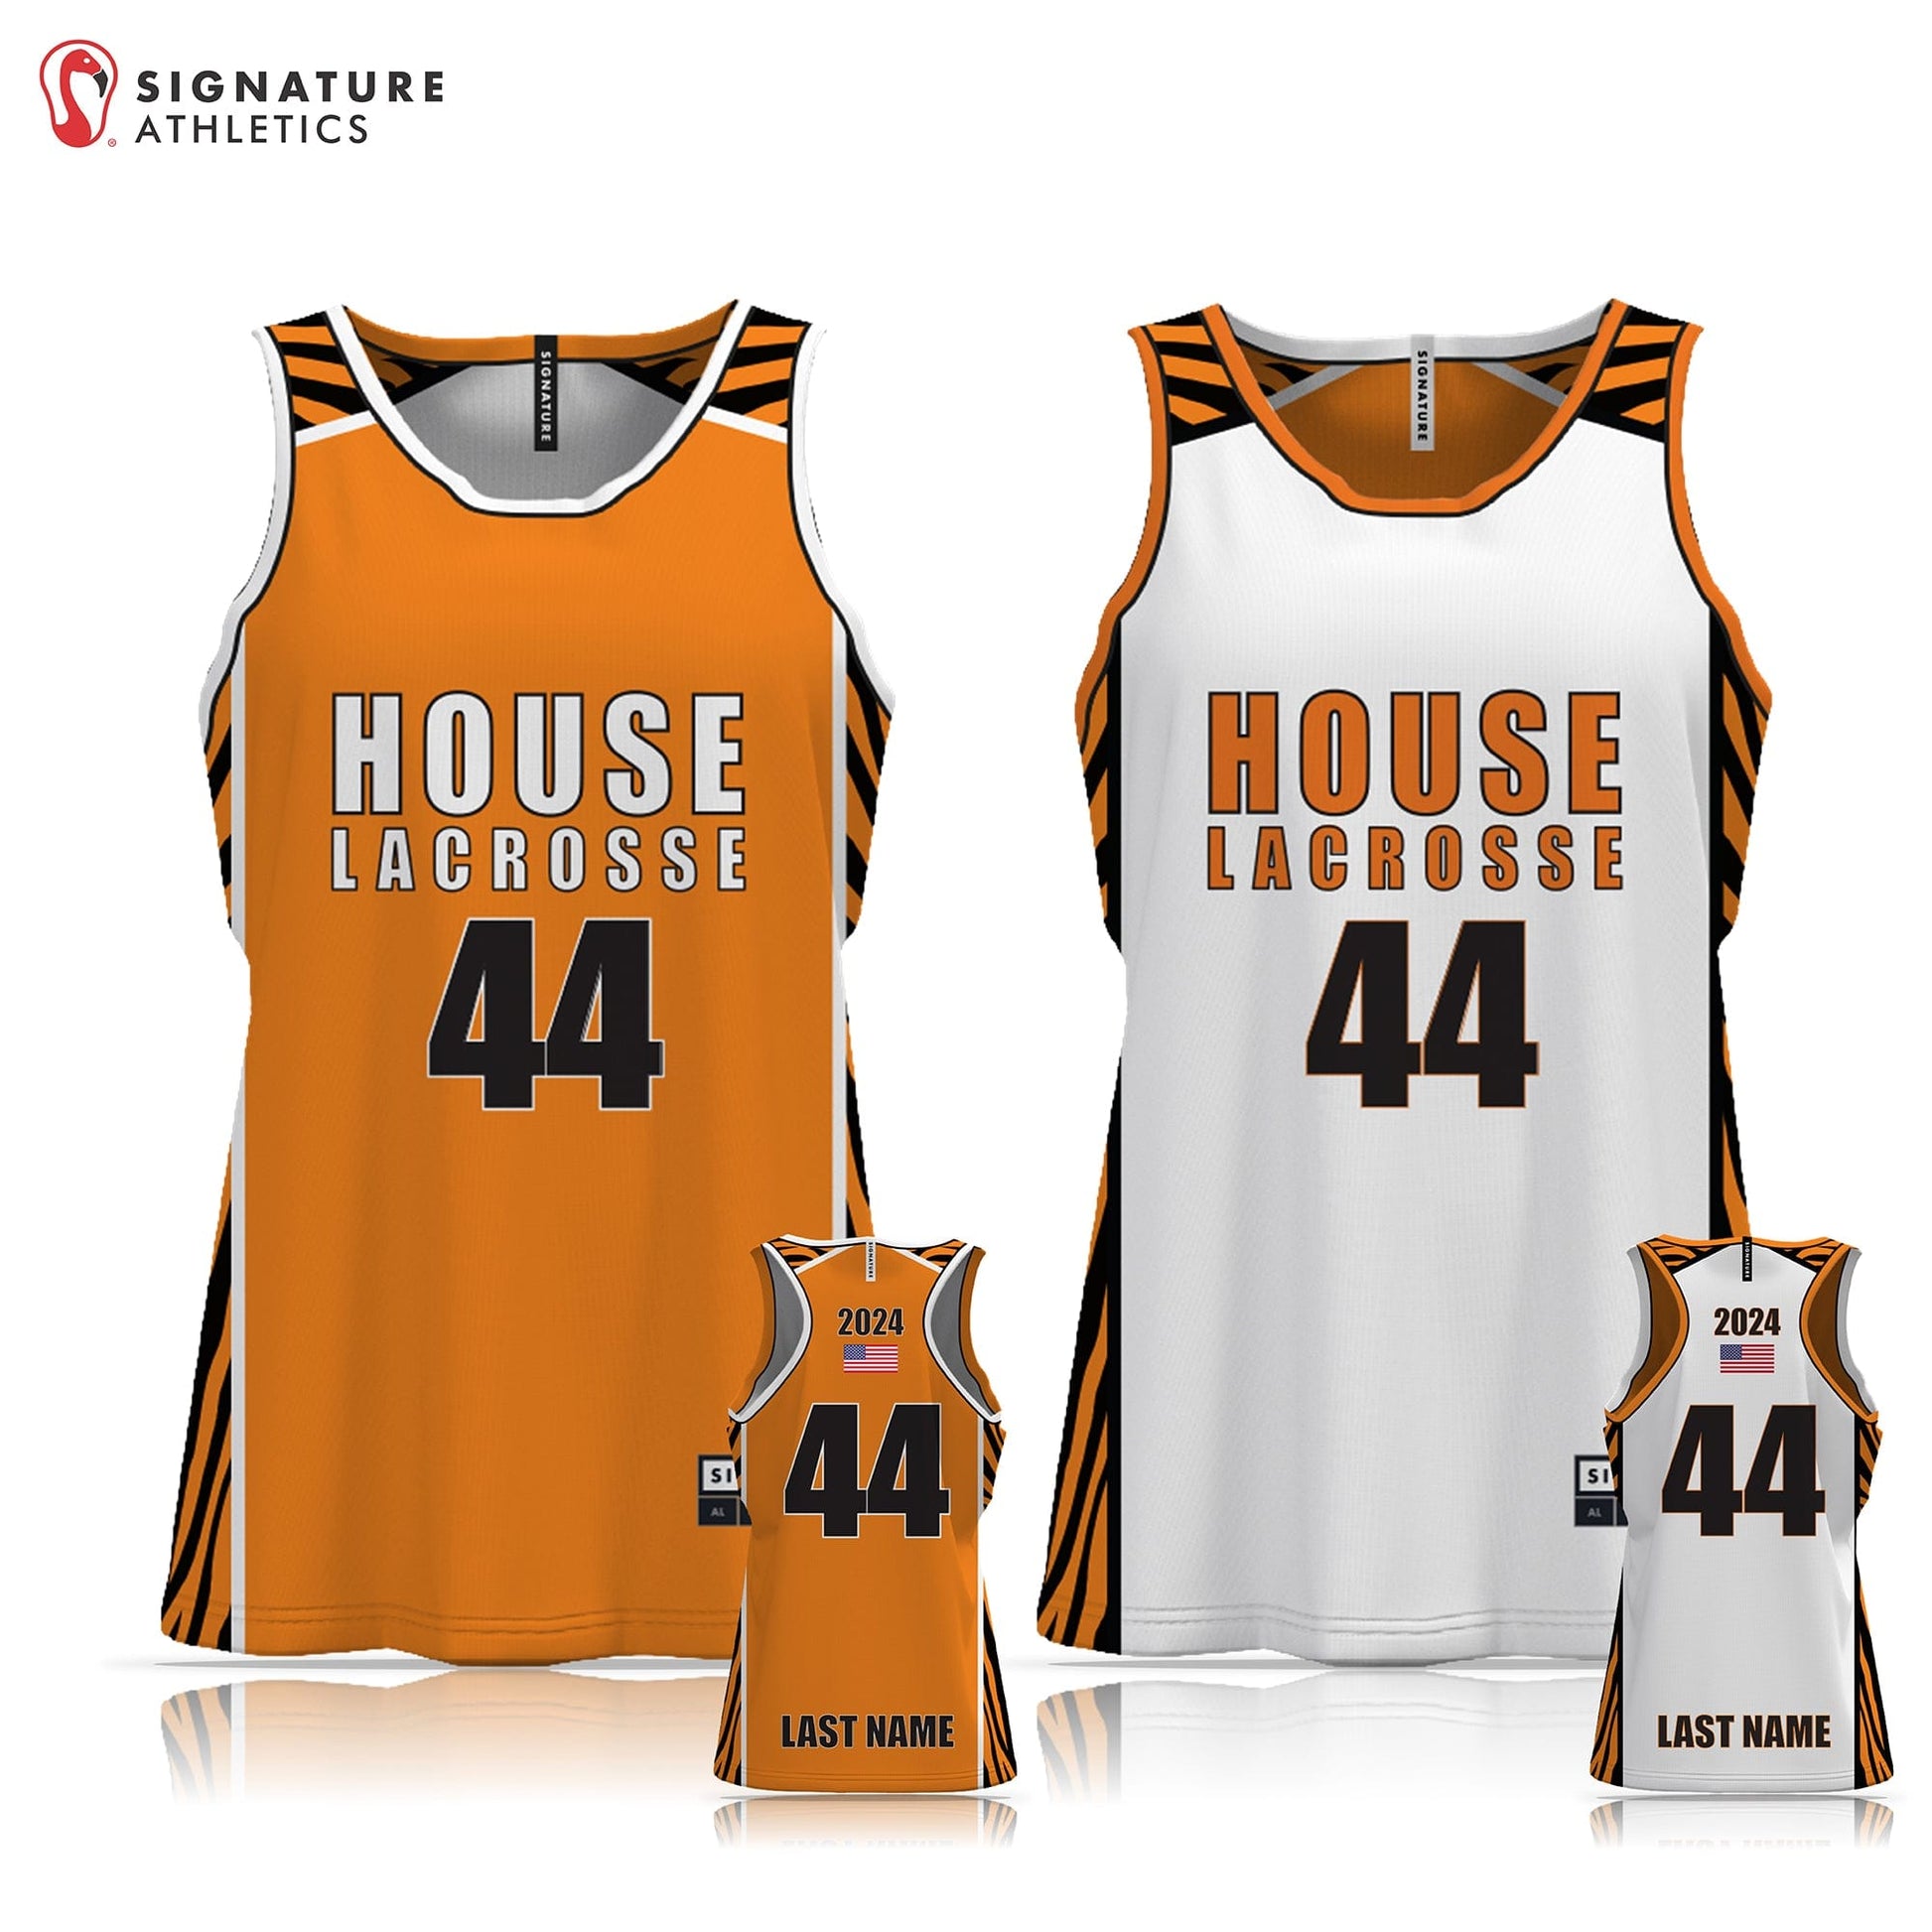 House of Sports Girls Lacrosse Women's 5 Piece Player Game Package Signature Lacrosse